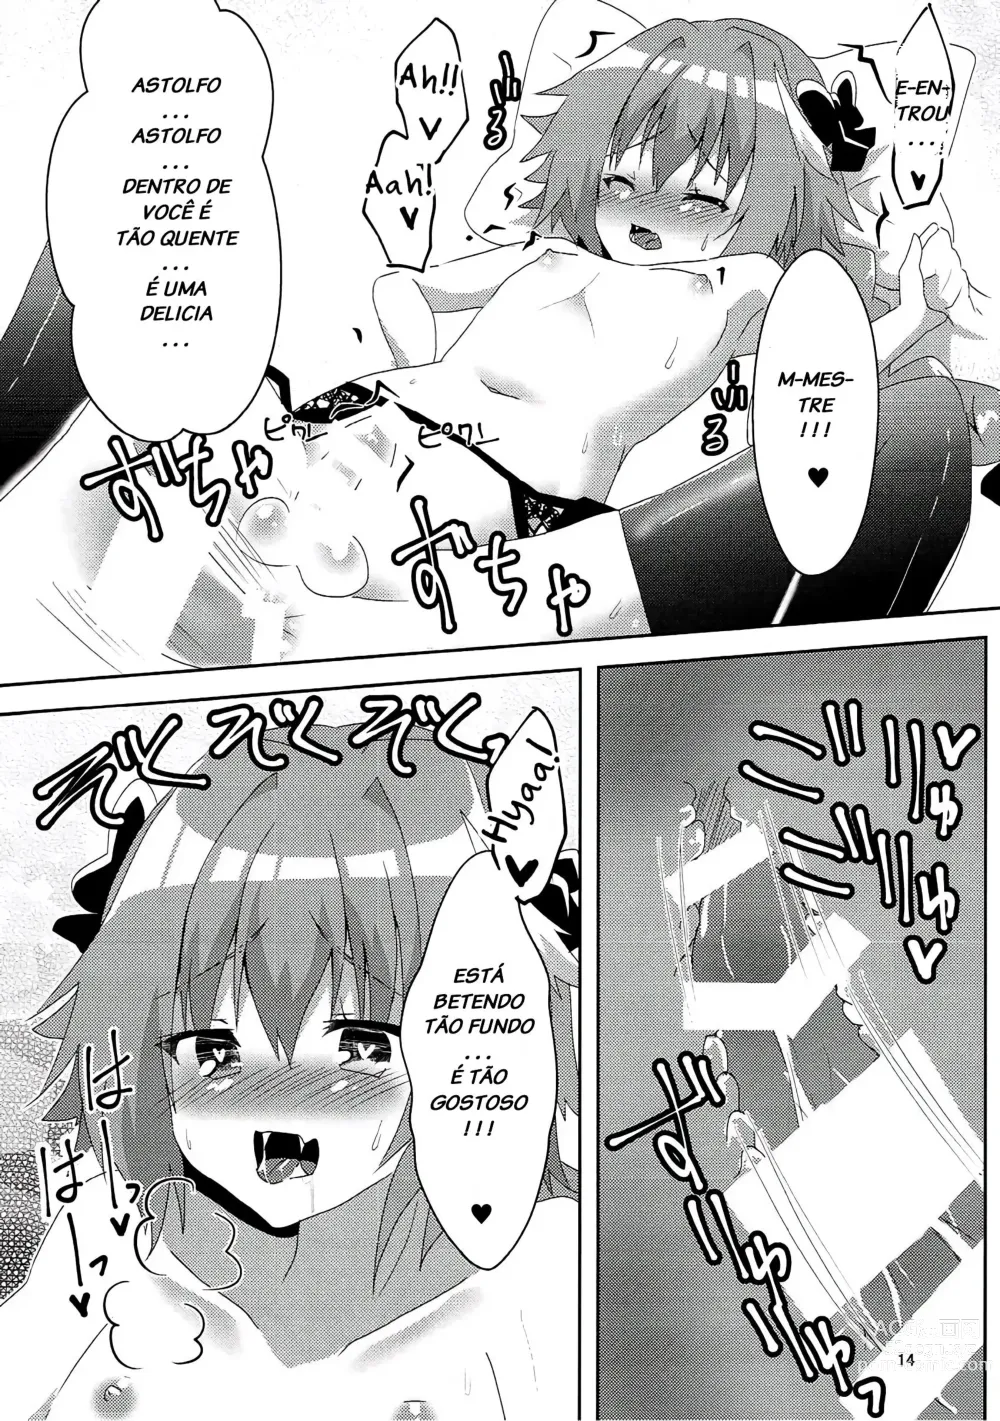 Page 14 of doujinshi Astolfoold